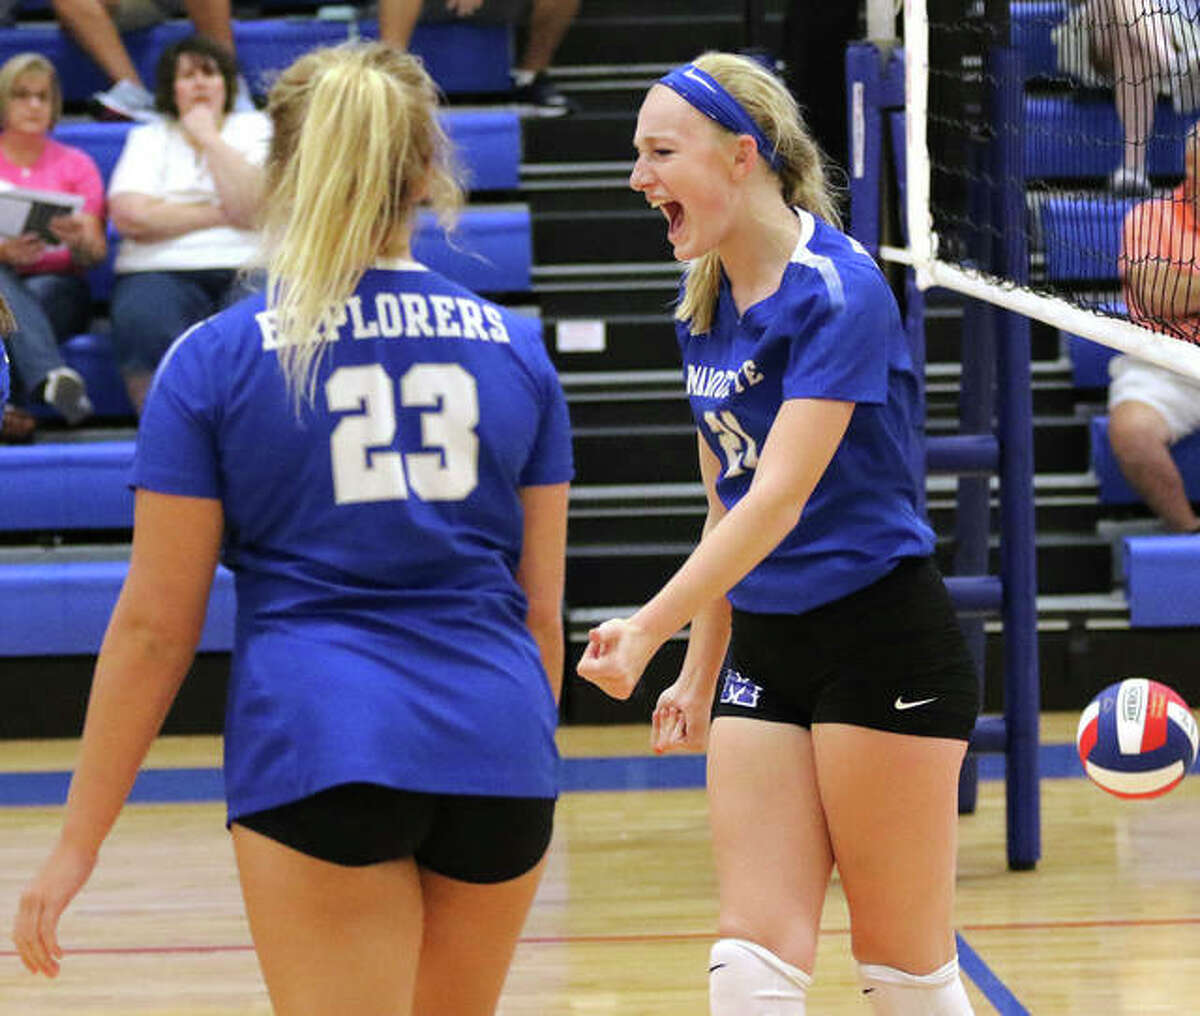 Marquette Catholic’s Emma Menke (right) celebrates a her point off a block with Rae Ezell (23) during a Roxana Tourney three-set loss to Jersey last month in Roxana. The teams met again Wednesday night at Marquette, with the Explorers winning in three sets to hand Jersey its first defeat.